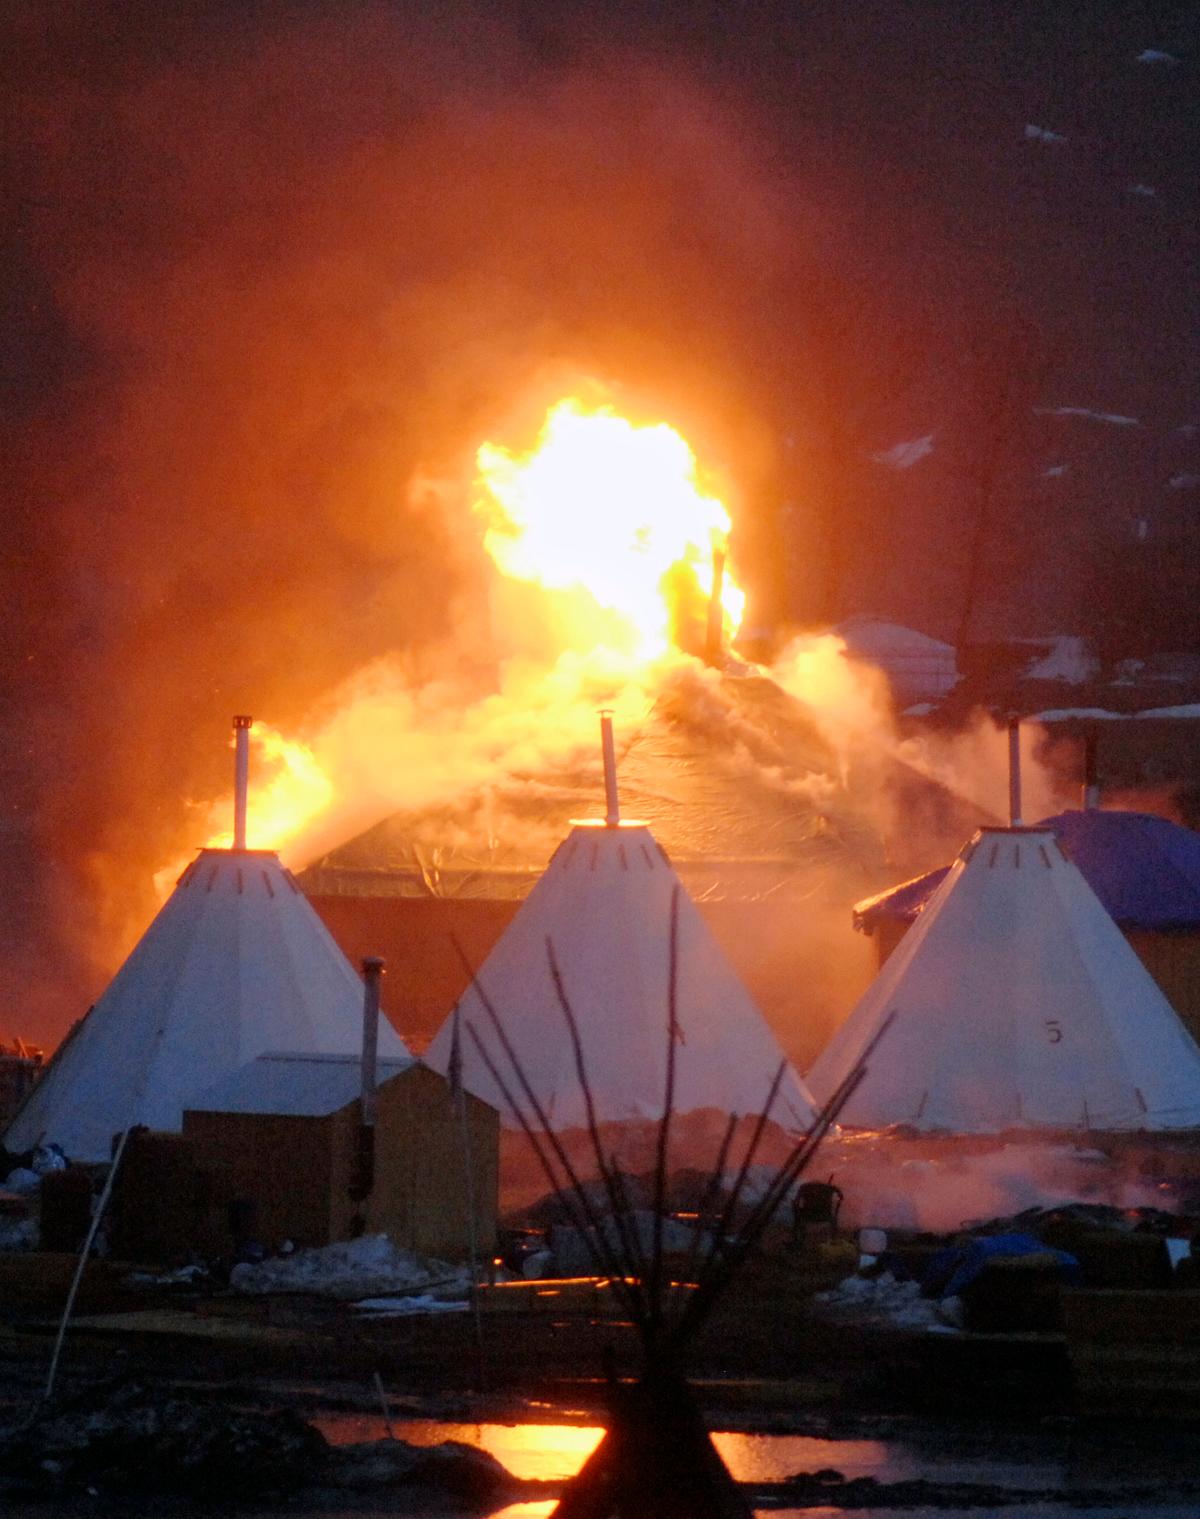 A fire on a building at a camp that has been home to demonstrators against the Dakota Access pipeline is seen after protesters set fire in Cannon Ball, N.D., on Feb. 22, 2017. (Mike Mccleary/The Bismarck Tribune via AP)